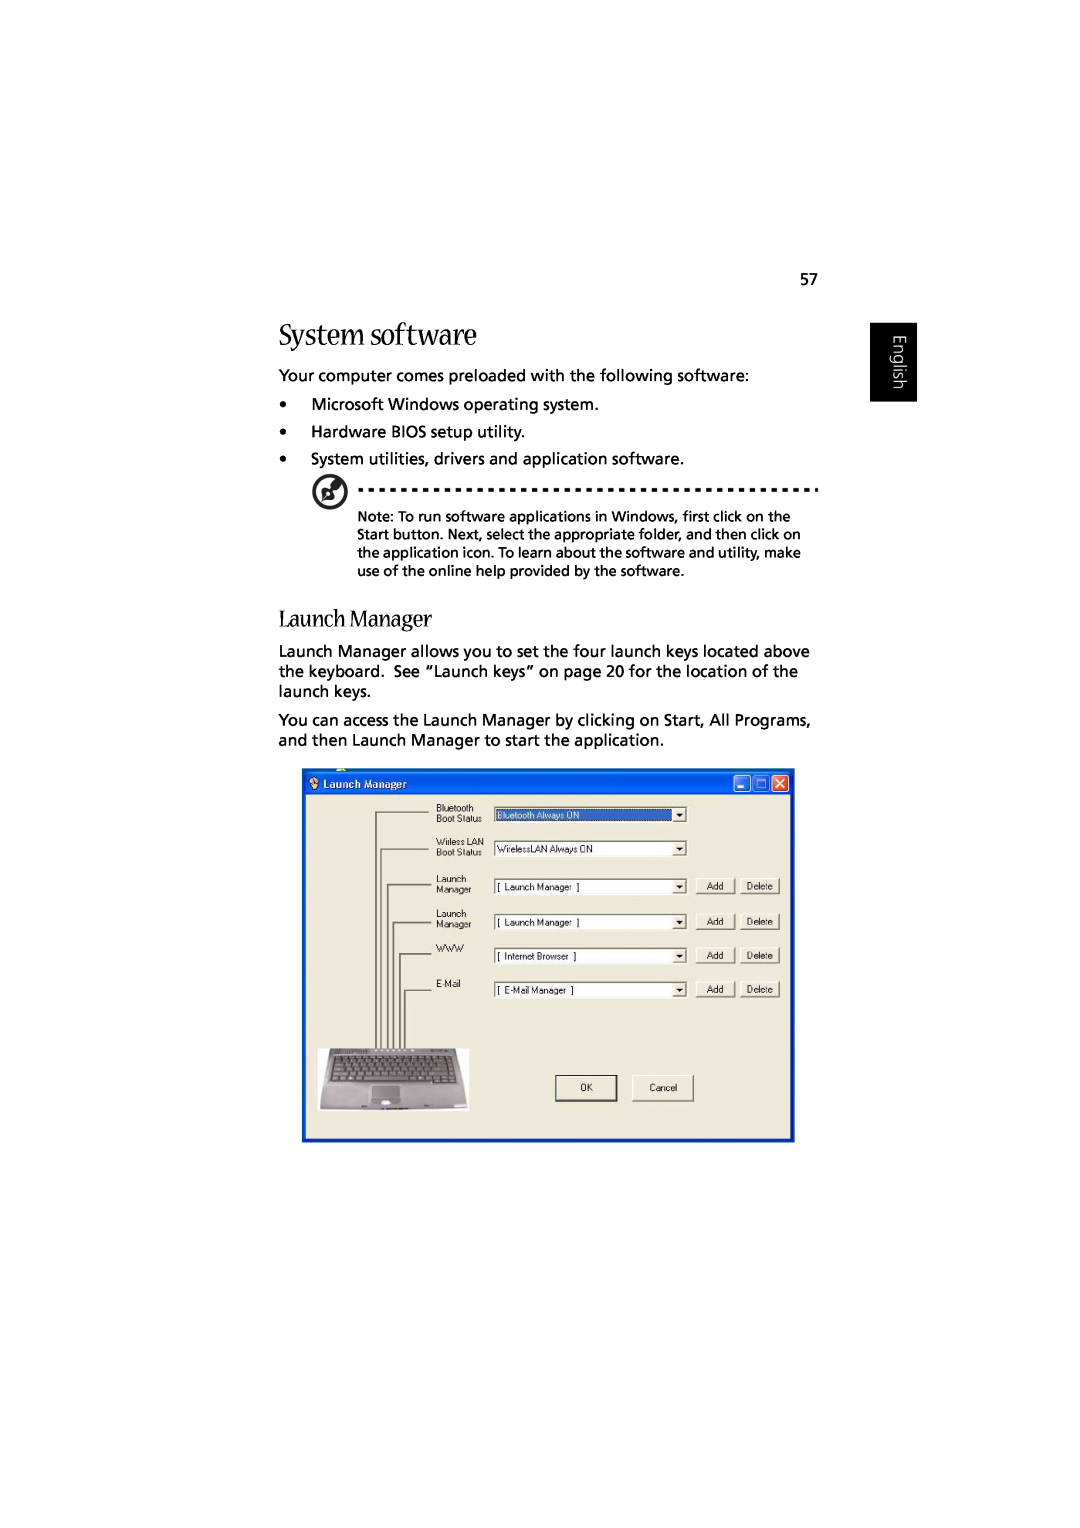 Acer Aspire 1350 manual System software, Launch Manager, English 